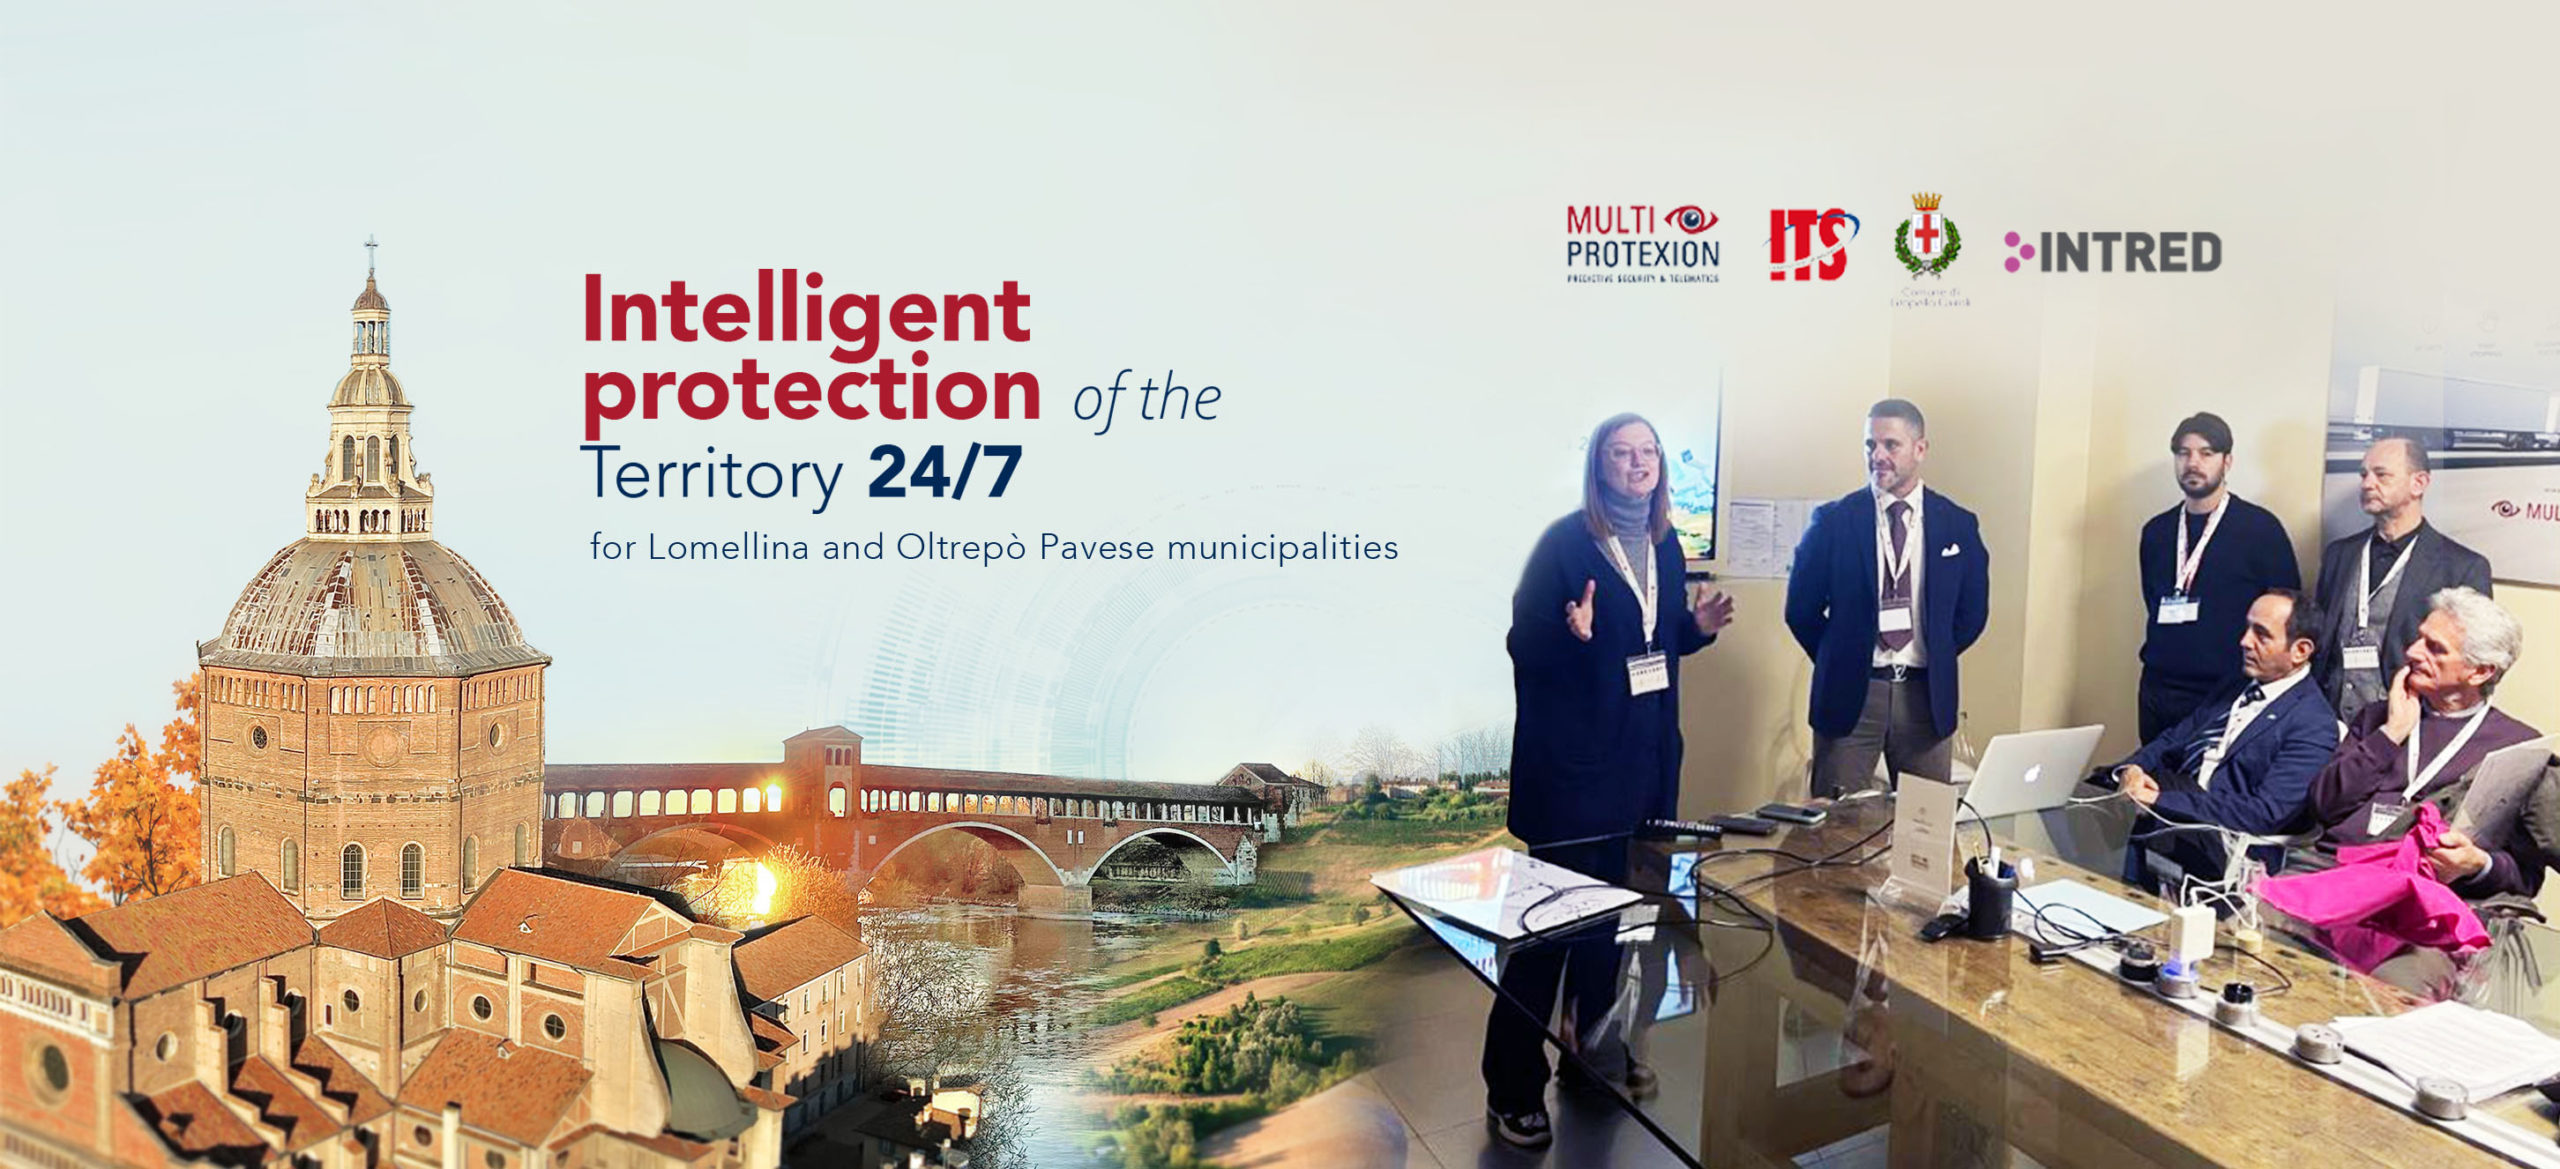 INTELLIGENT PROTECTION OF THE TERRITORY 24/7 FOR LOMELLINA AND OLTREPÒ PAVESE MUNICIPALITIES